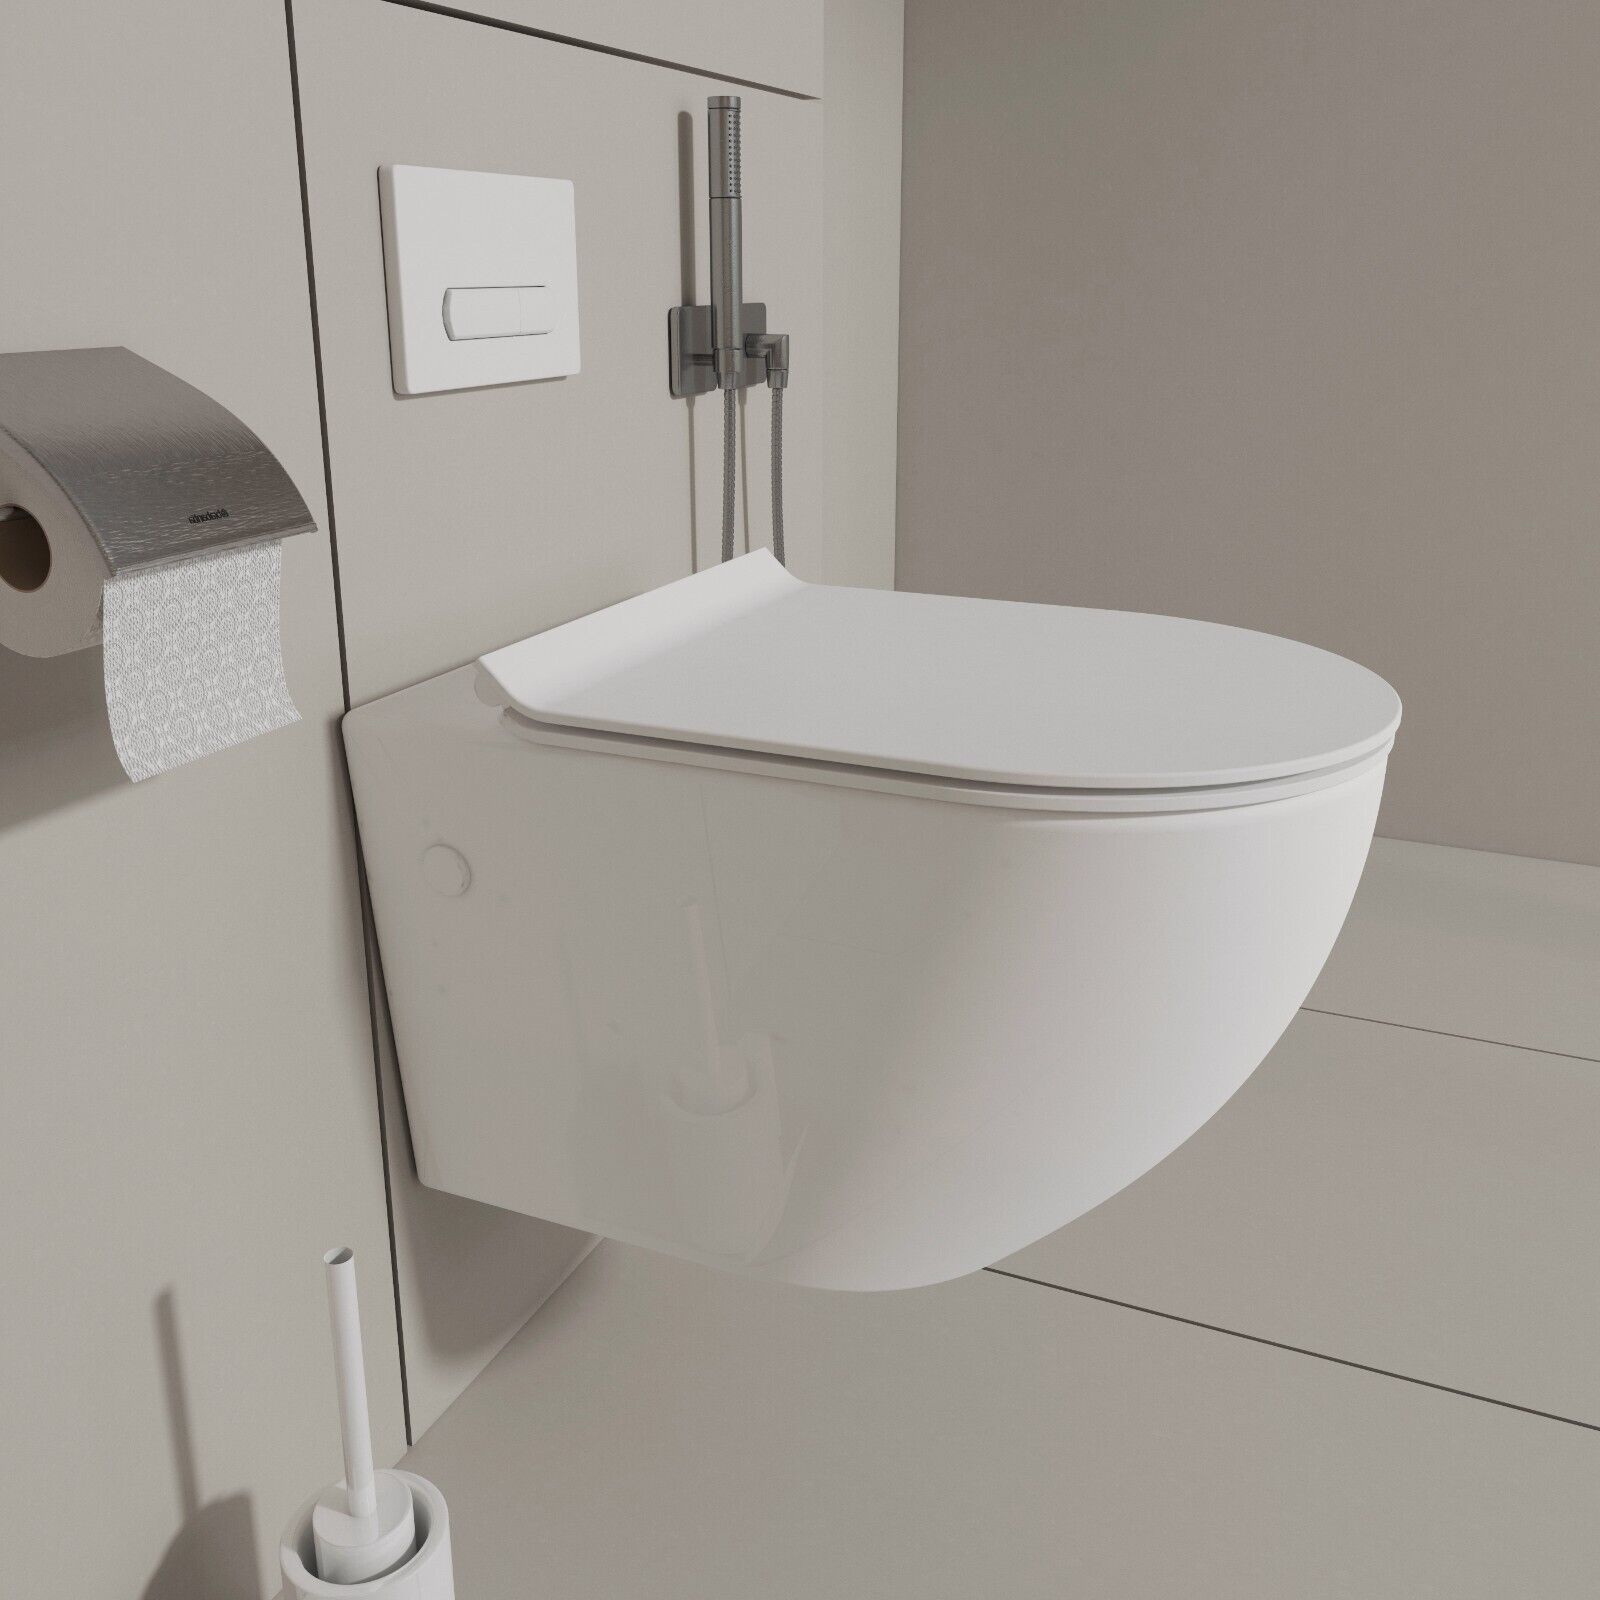 MEJE Wall-Hung Toilet Bowl - Glossy White